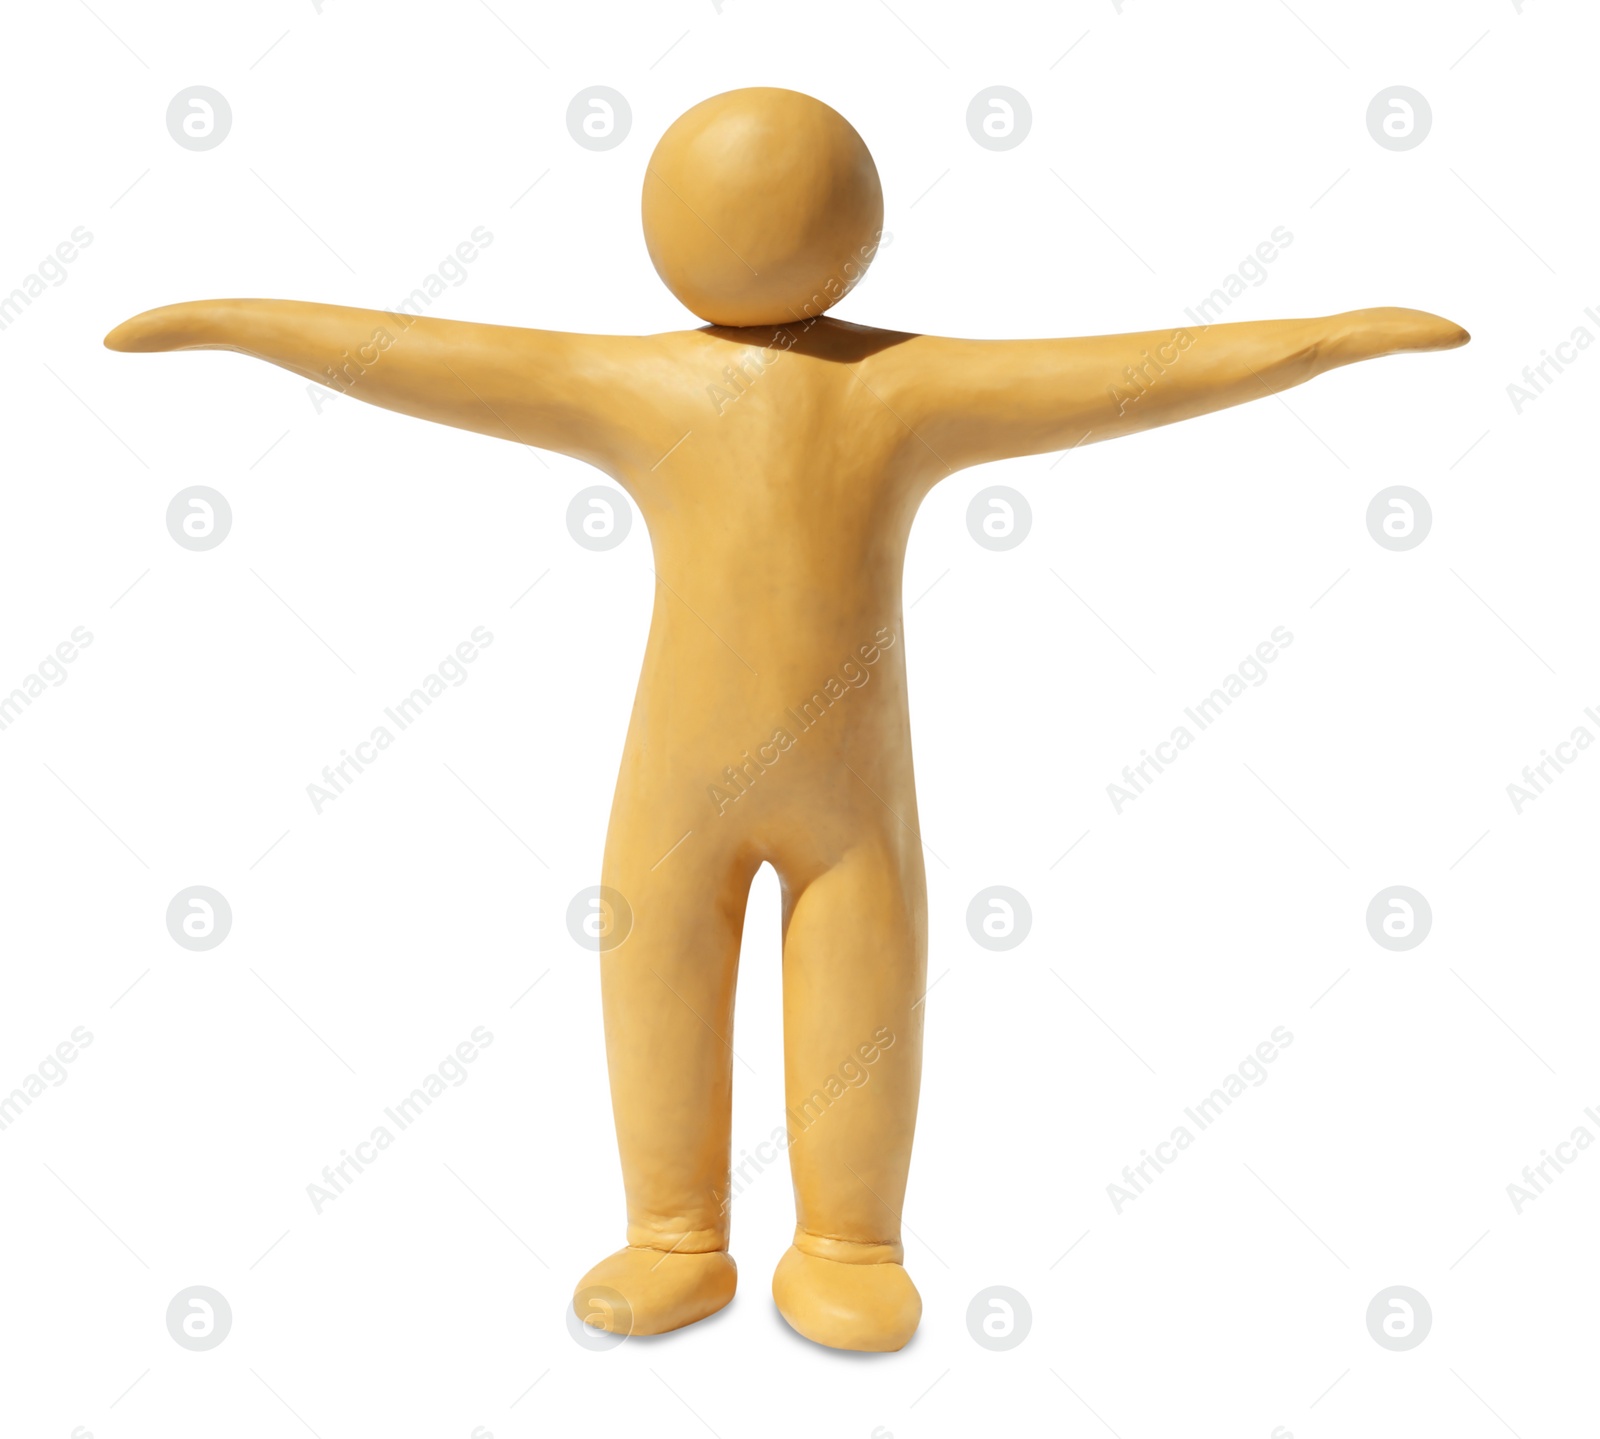 Photo of Human figure with arms wide open made of plasticine isolated on white